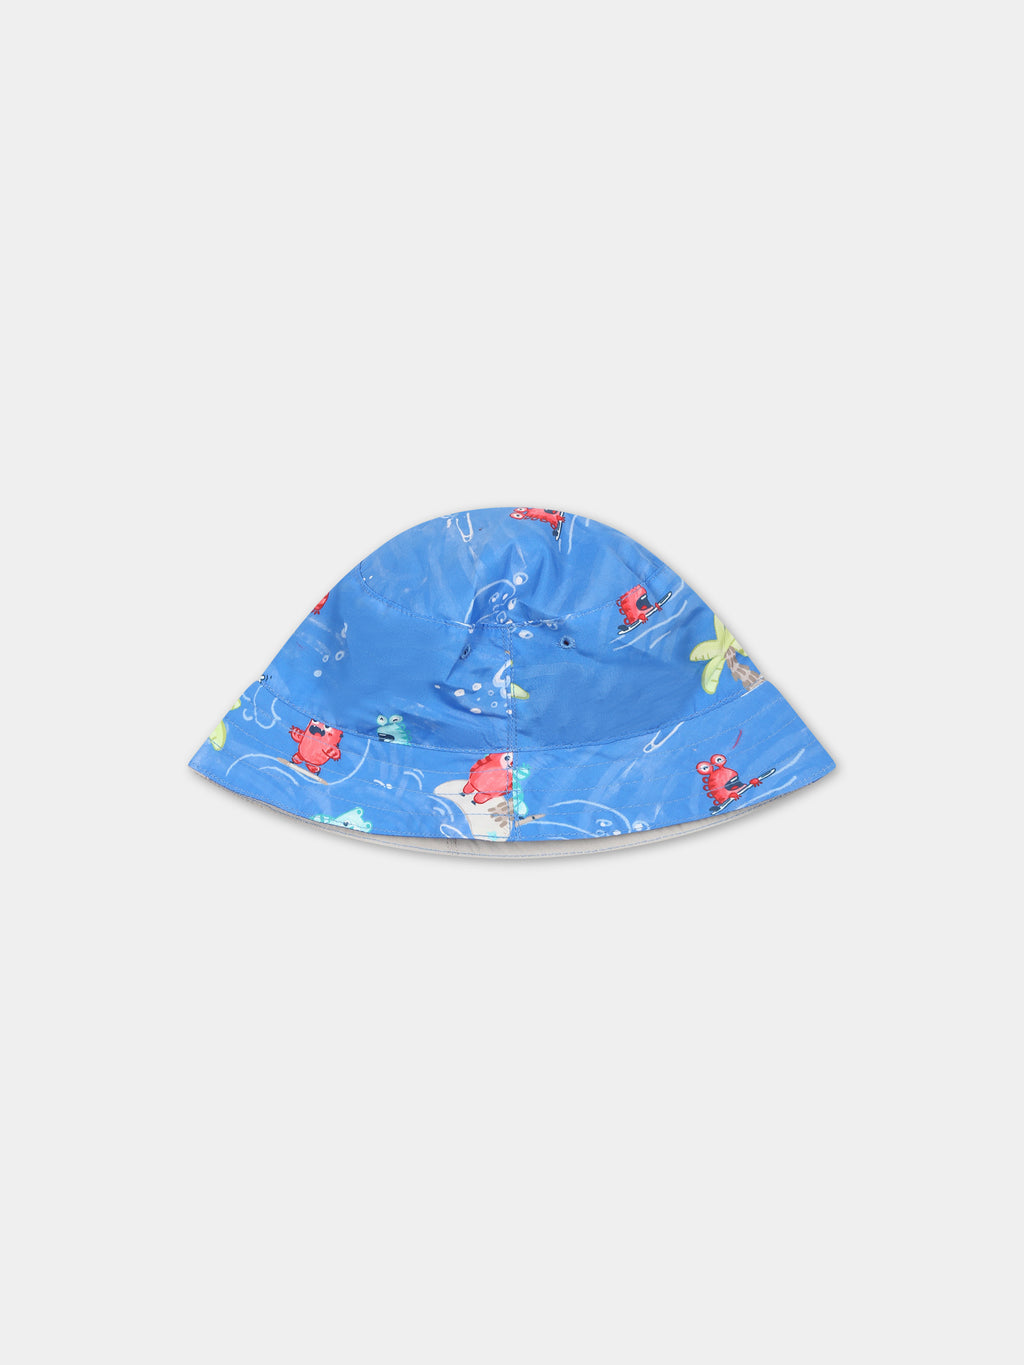 Reversible light blue cloche for baby boy with monsters